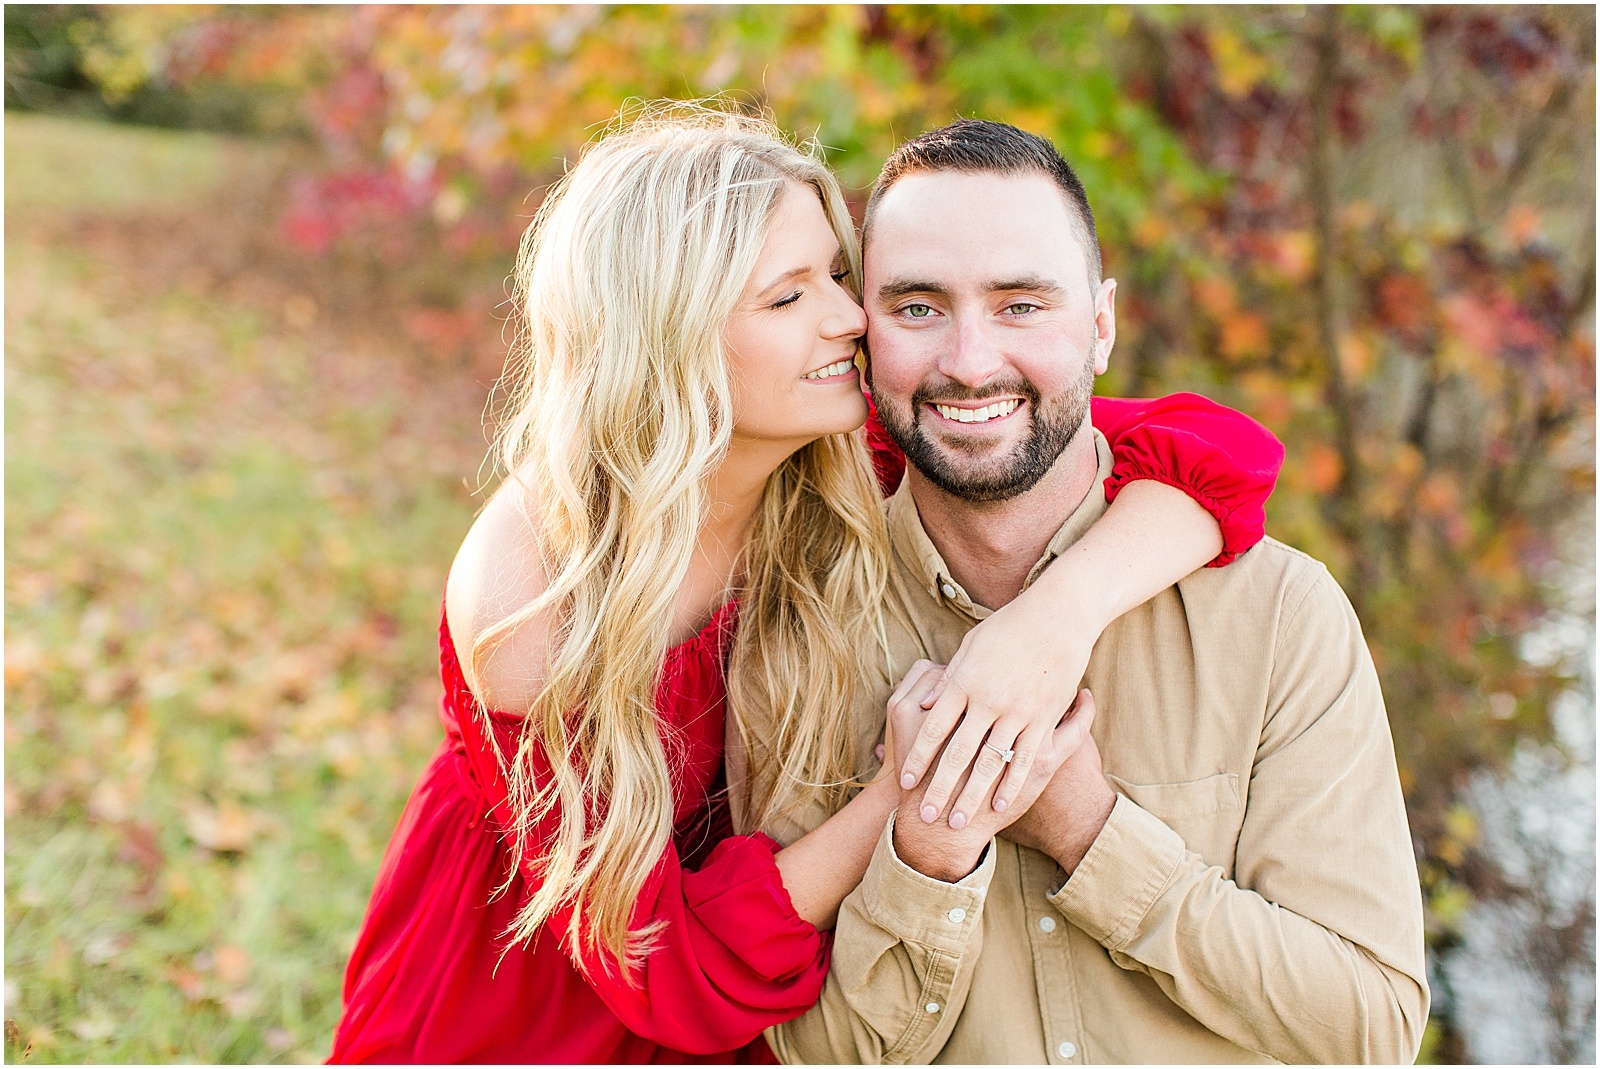 A Southern Indiana Engagement Session | Charleston and Erin | Bret and Brandie Photography035.jpg